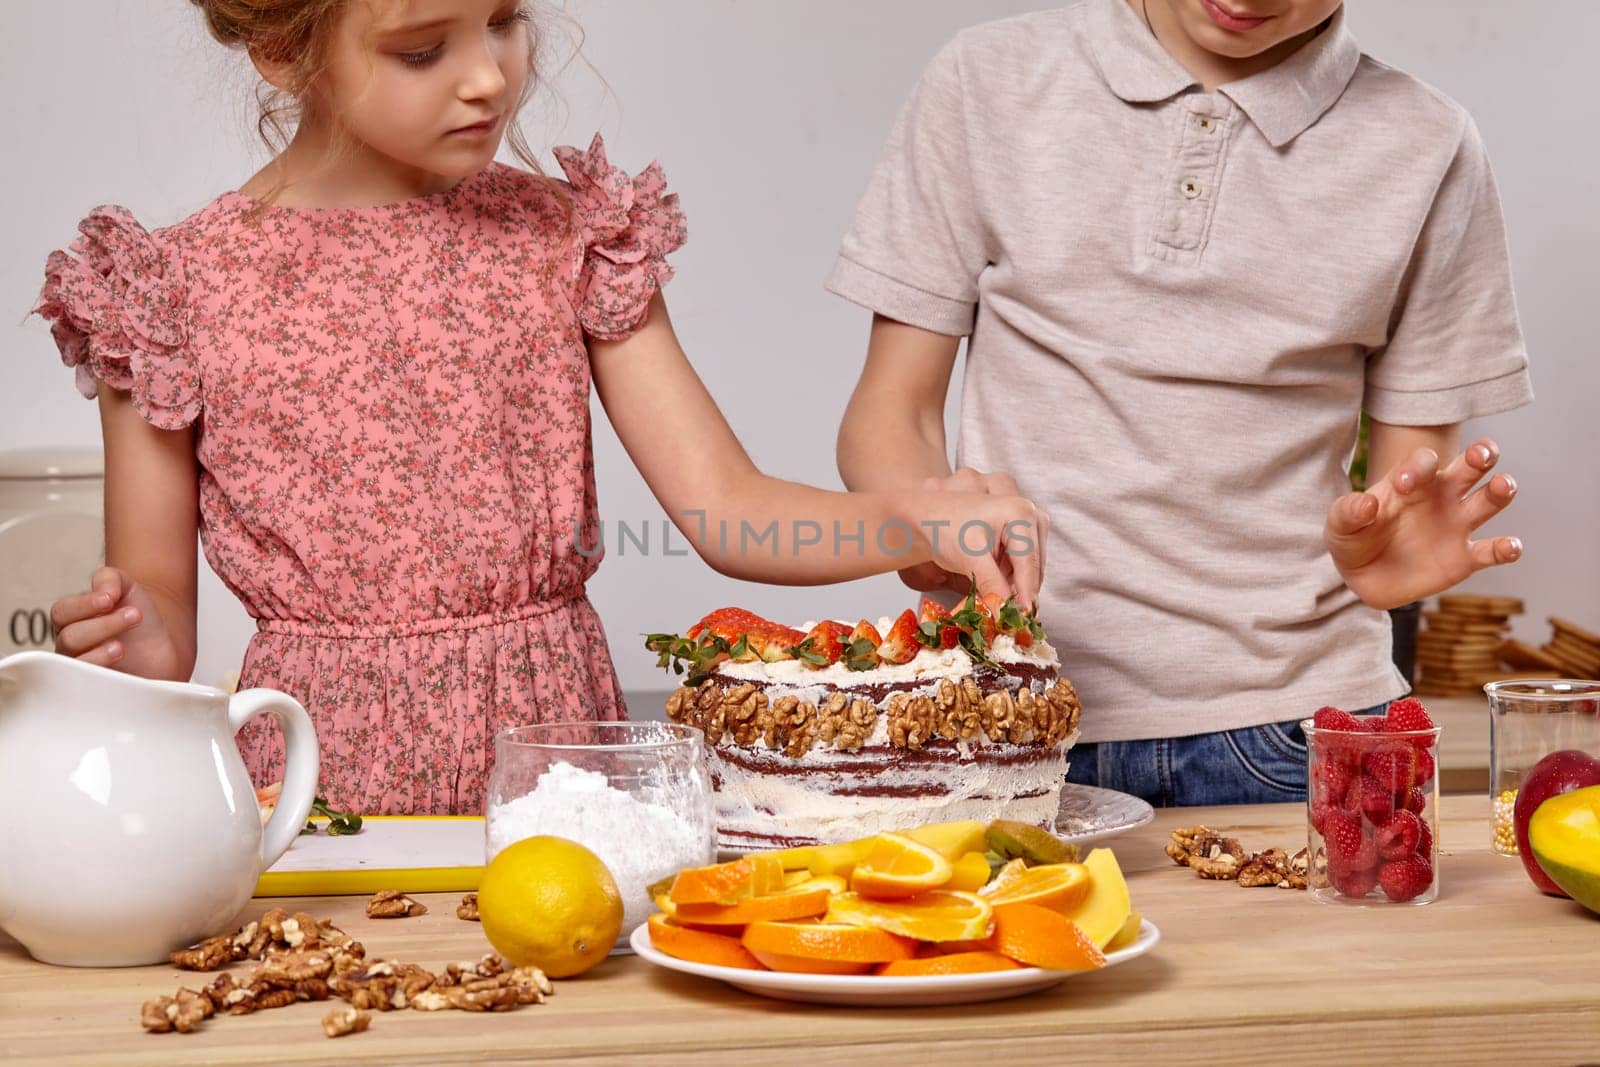 Pretty child dressed in a light t-shirt and jeans and a charming girl with a braid in her hair, wearing in a pink dress are making a cake at a kitchen, against a white wall. They are decorating it with a strawberry.